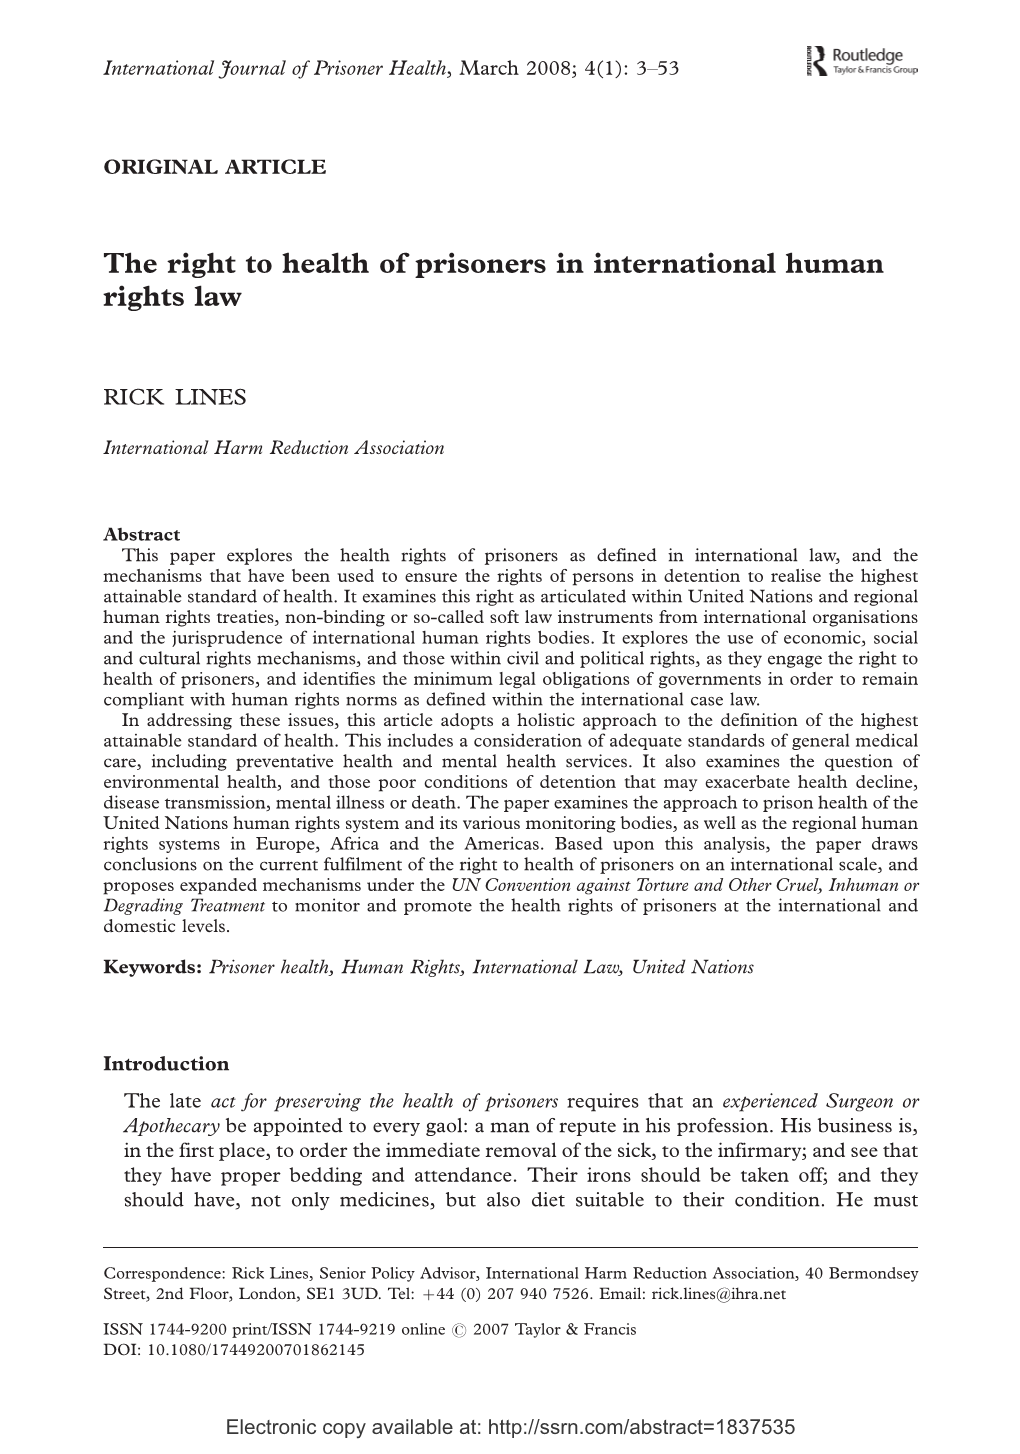 The Right to Health of Prisoners in International Human Rights Law